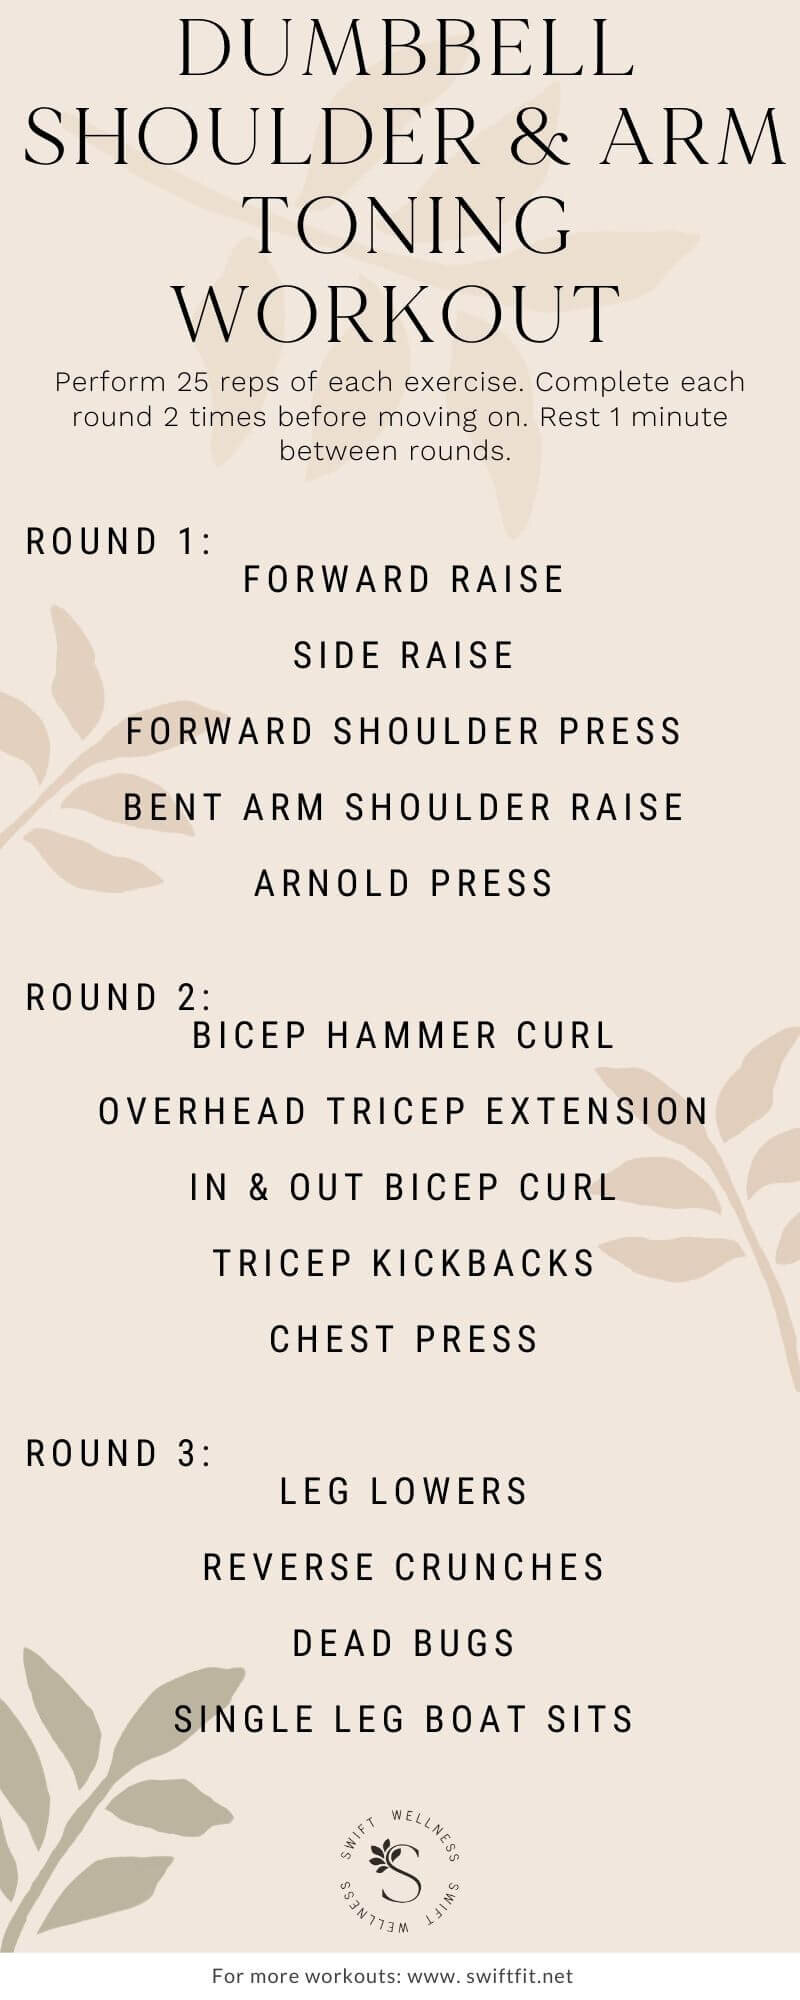 Arm Workout for Women with dumbbells for Tight, Toned Arms